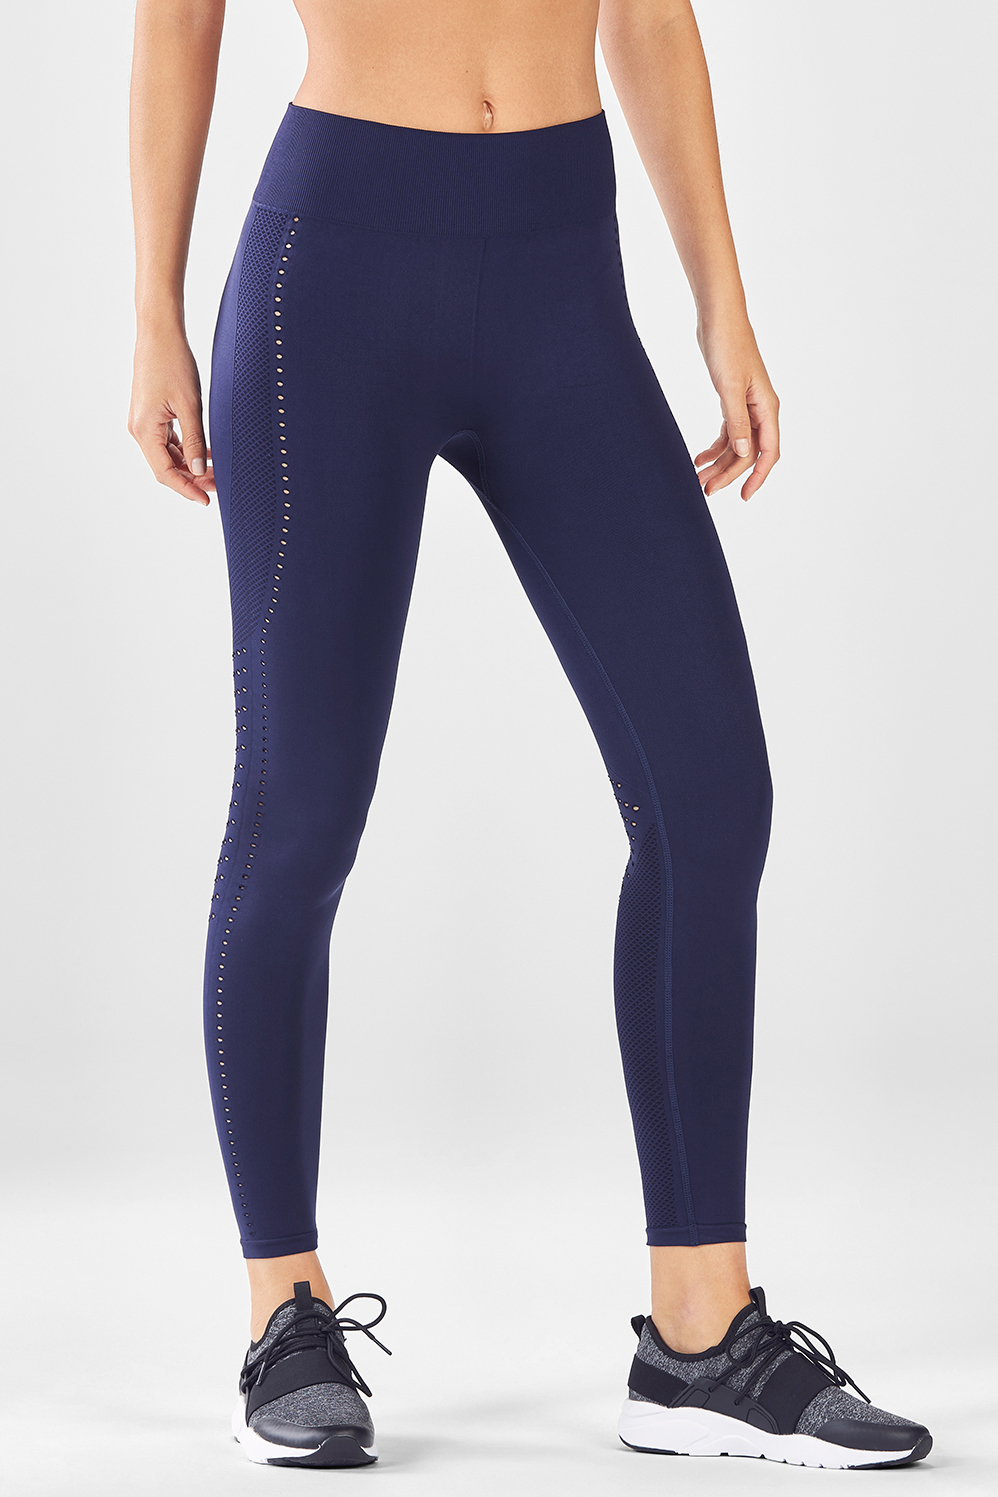 Kate Hudson Launches Fabletics Athleticwear Line; Lives in Leggings